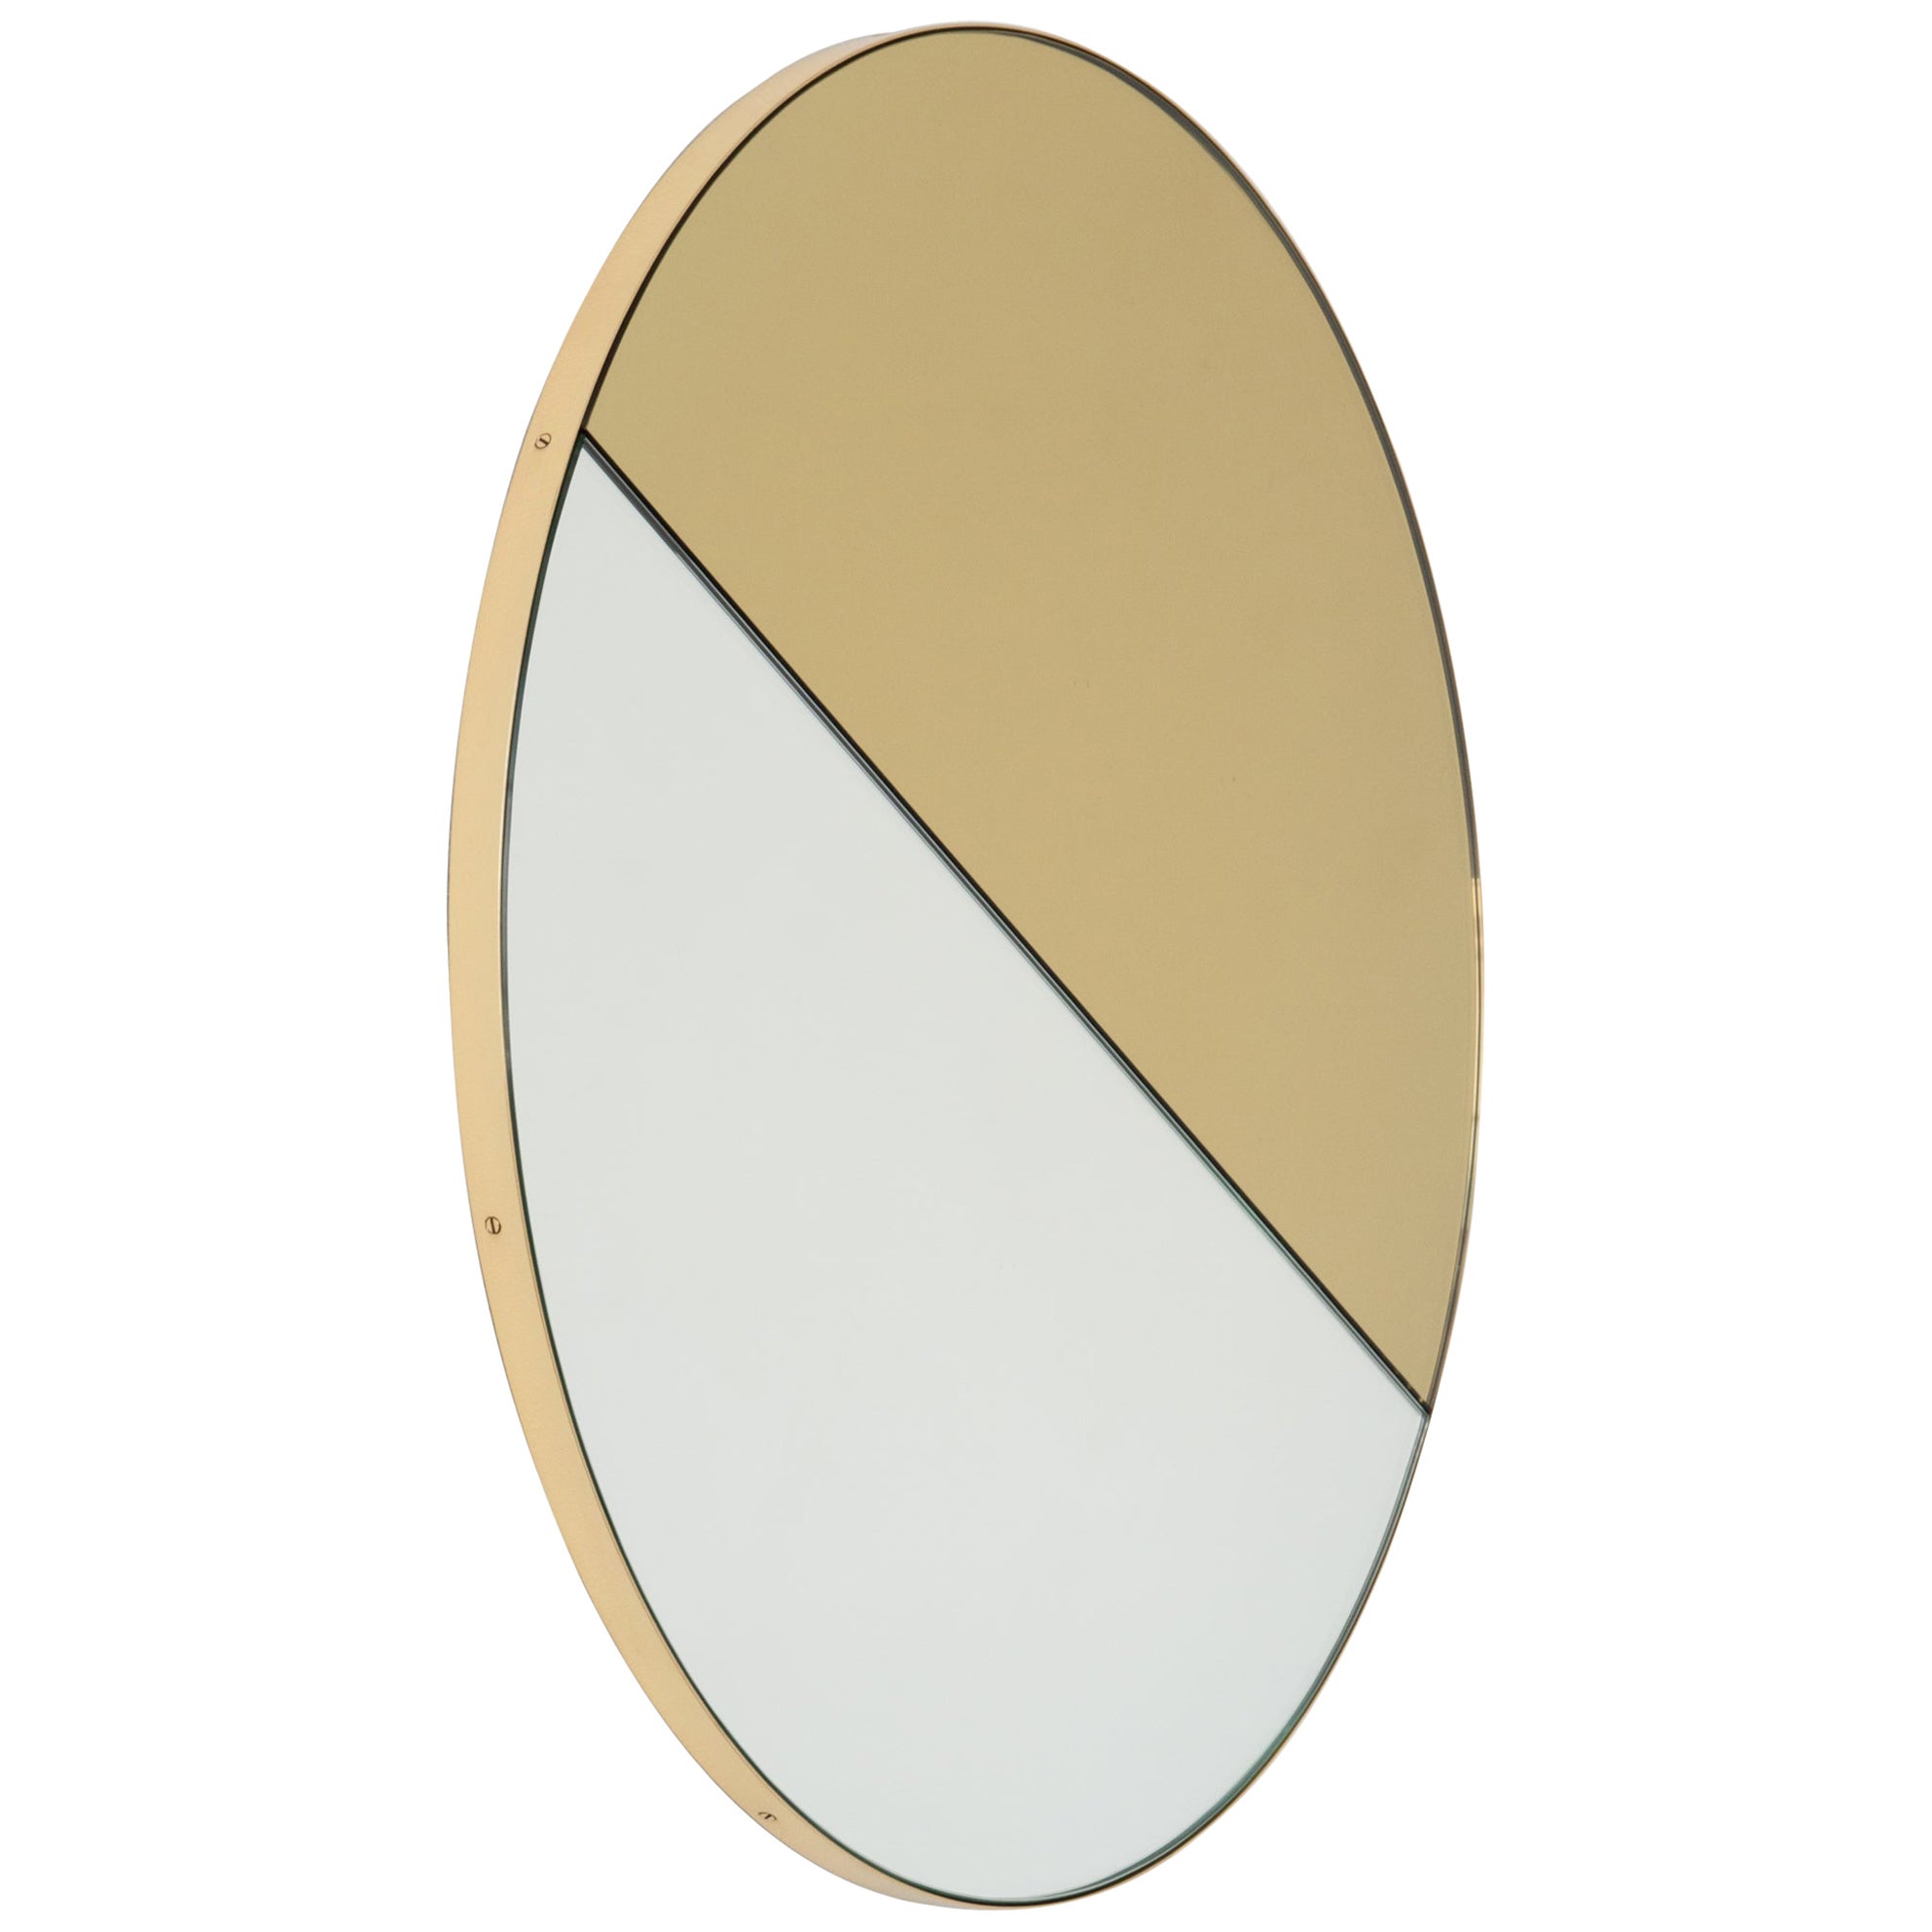 Orbis Dualis Round Mixed Gold Tinted Contemporary Mirror with Brass Frame, XL